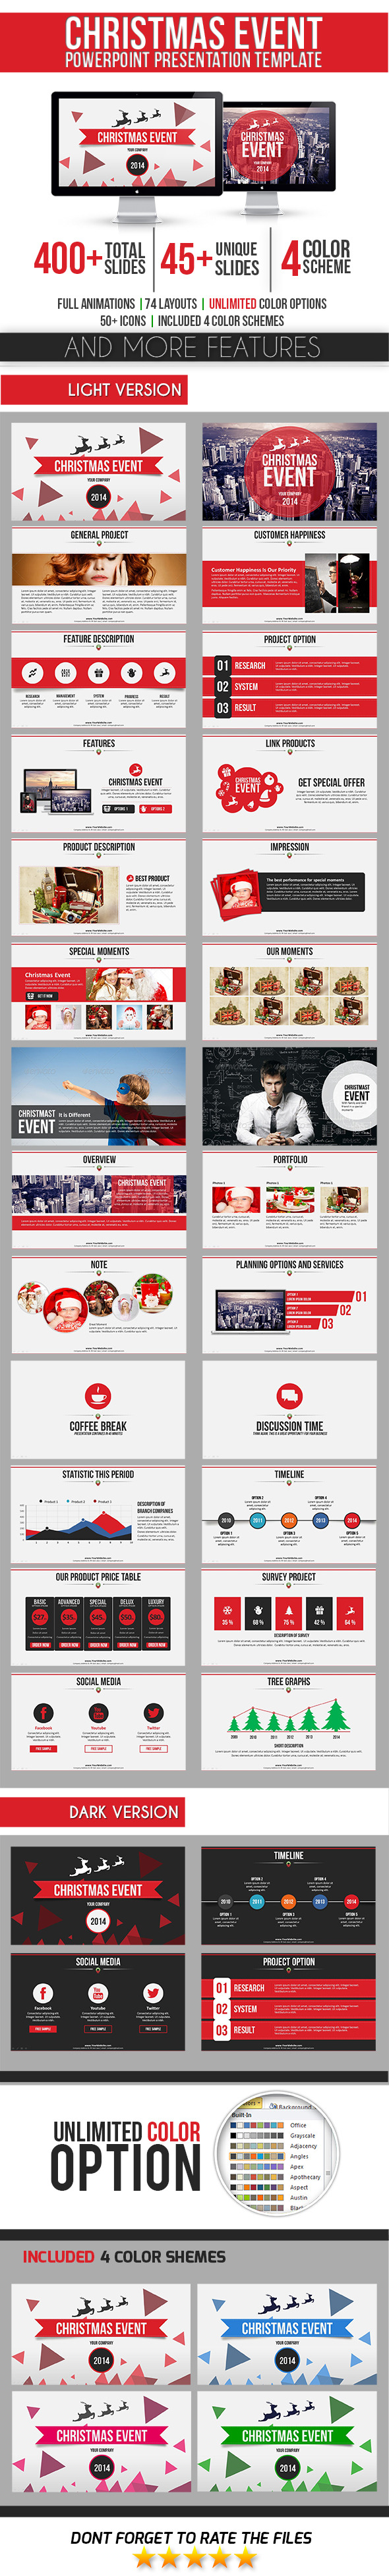 Christmas Event PowerPoint Template